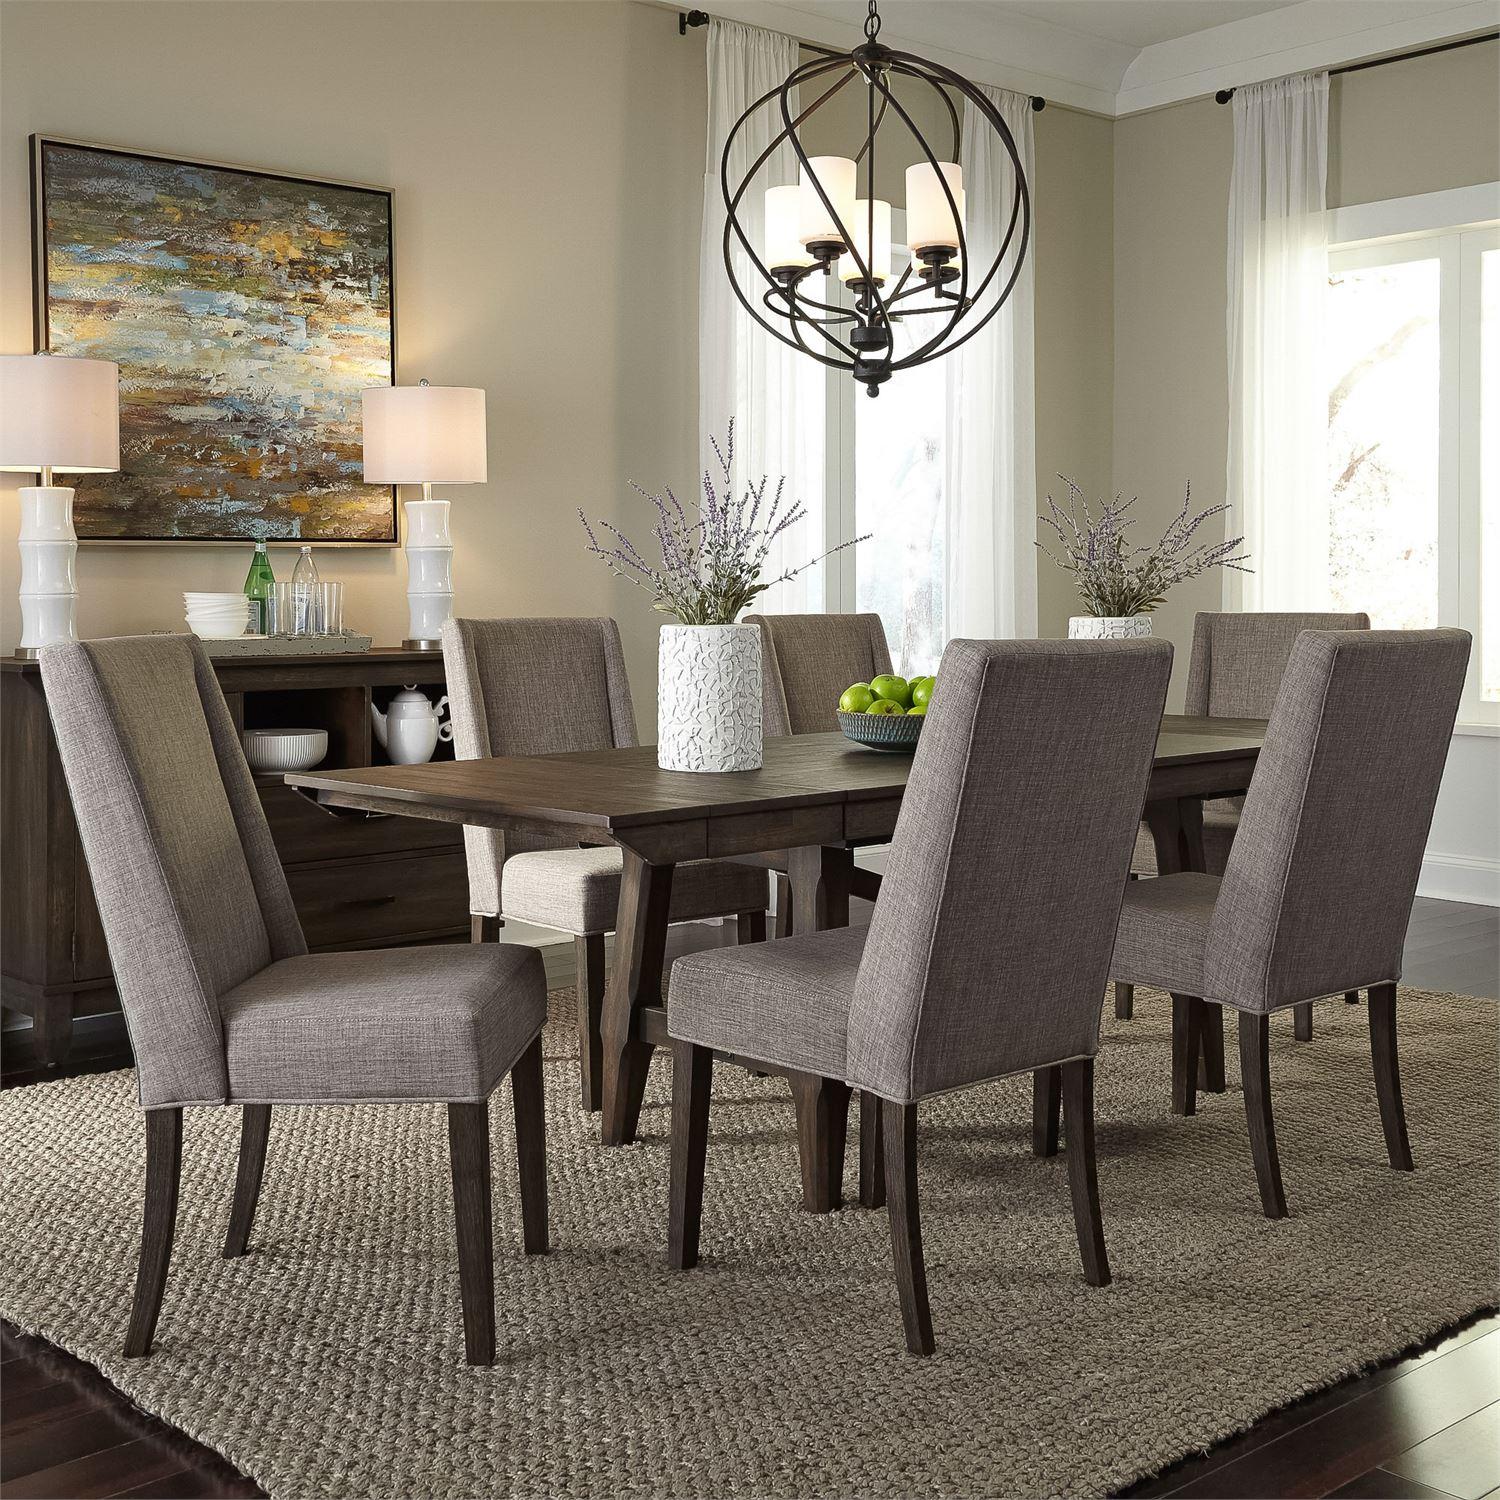 Rustic Dining Room Set Double Bridge  (152-CD) Dining Room Set 152-CD-O7TRS in Chestnut Fabric